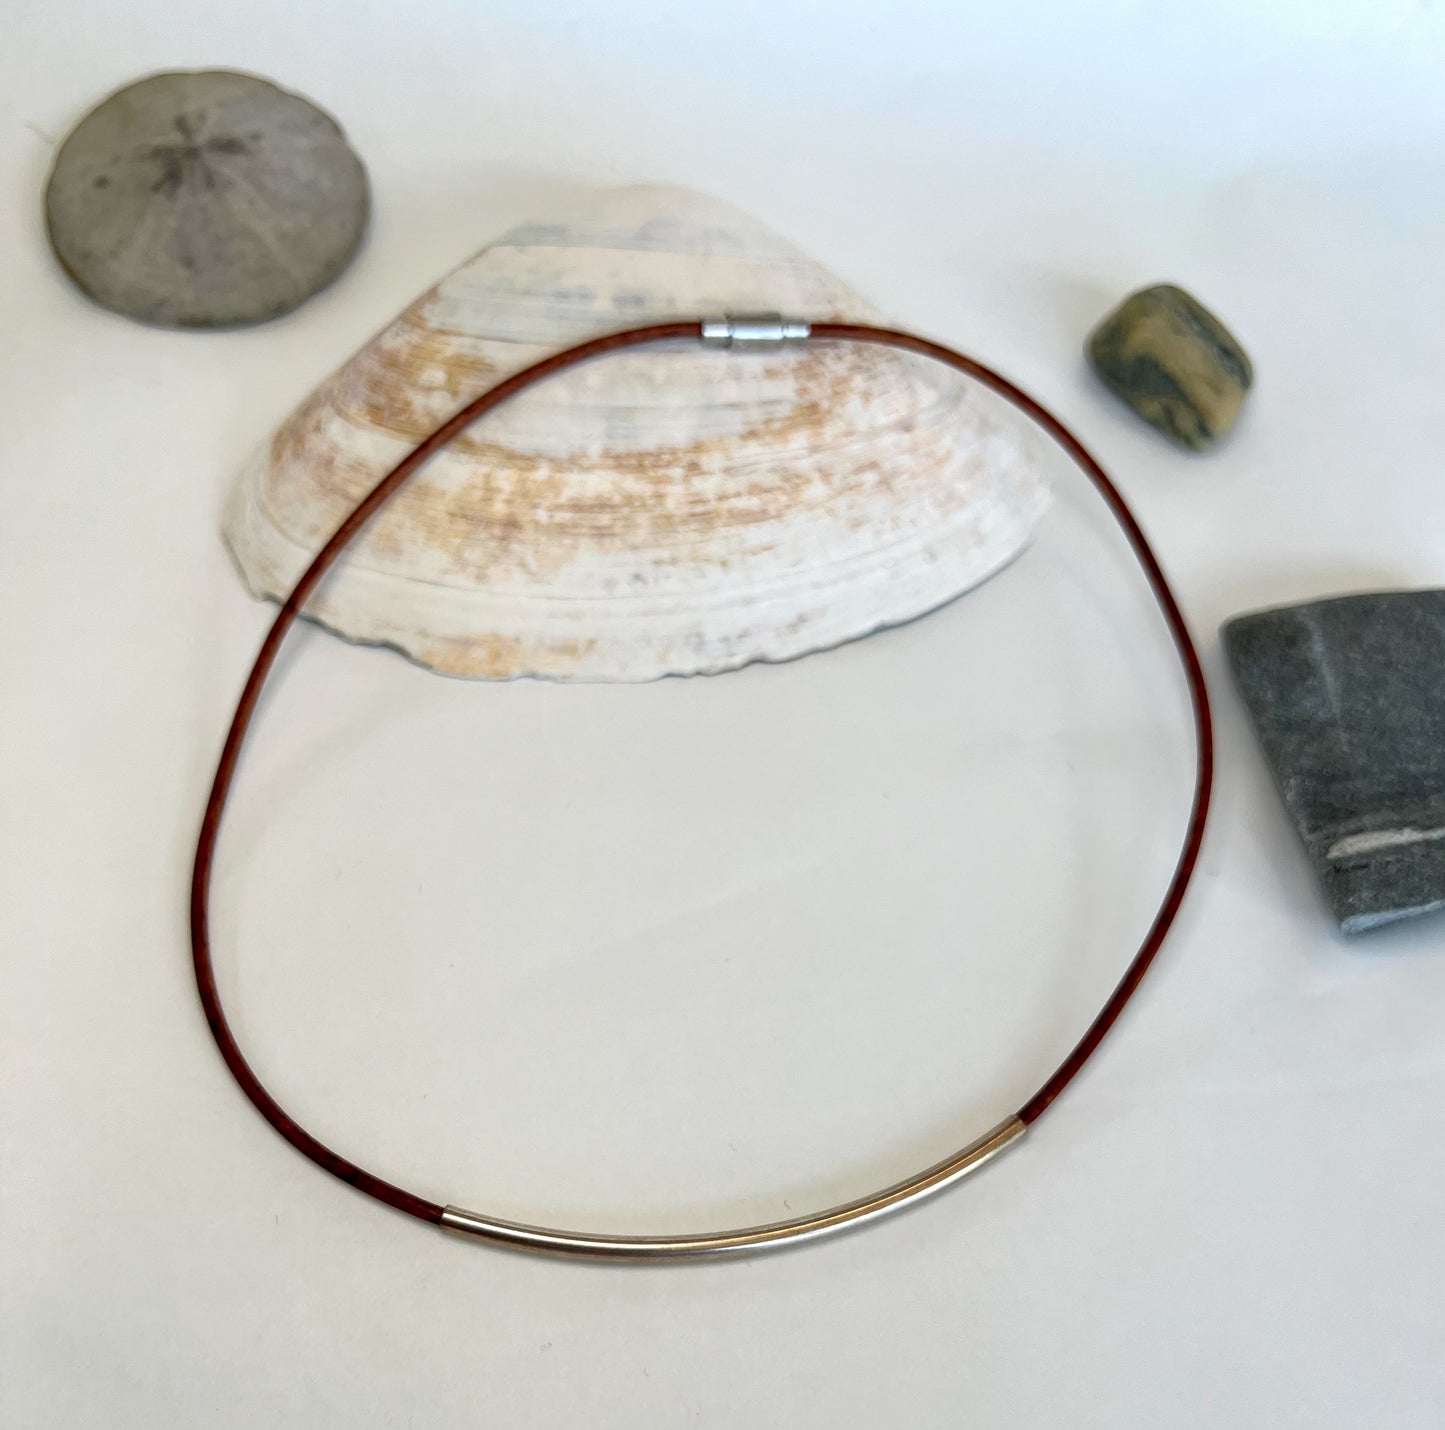 Leather Necklace. Sterling sliver choker necklace with curved tube strung on soft beautiful leather with sterling clasp